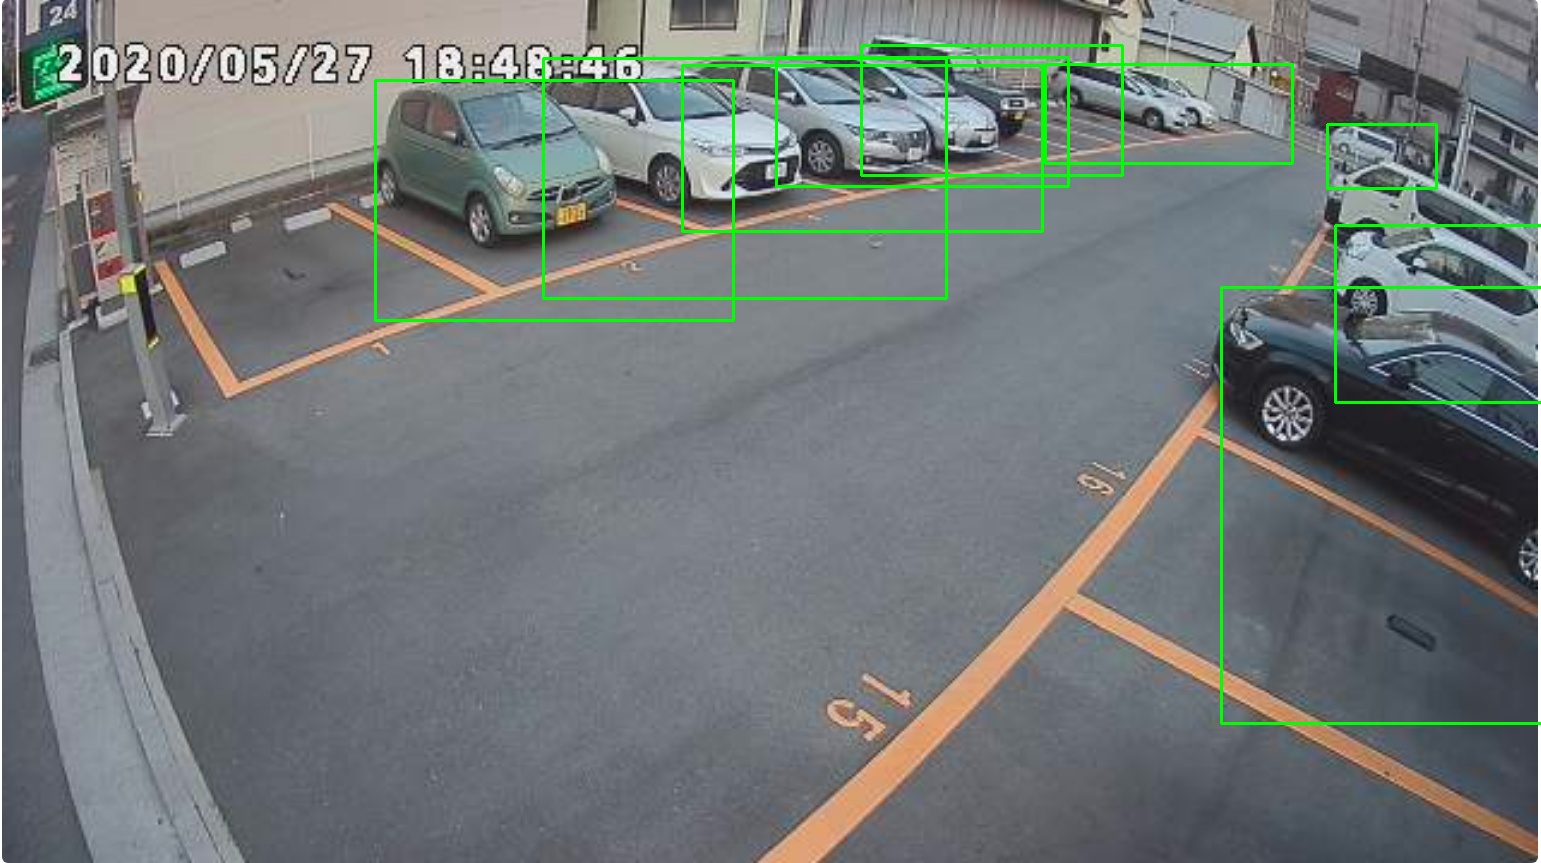 Fig 6:  Vehicles detected by YoloV3